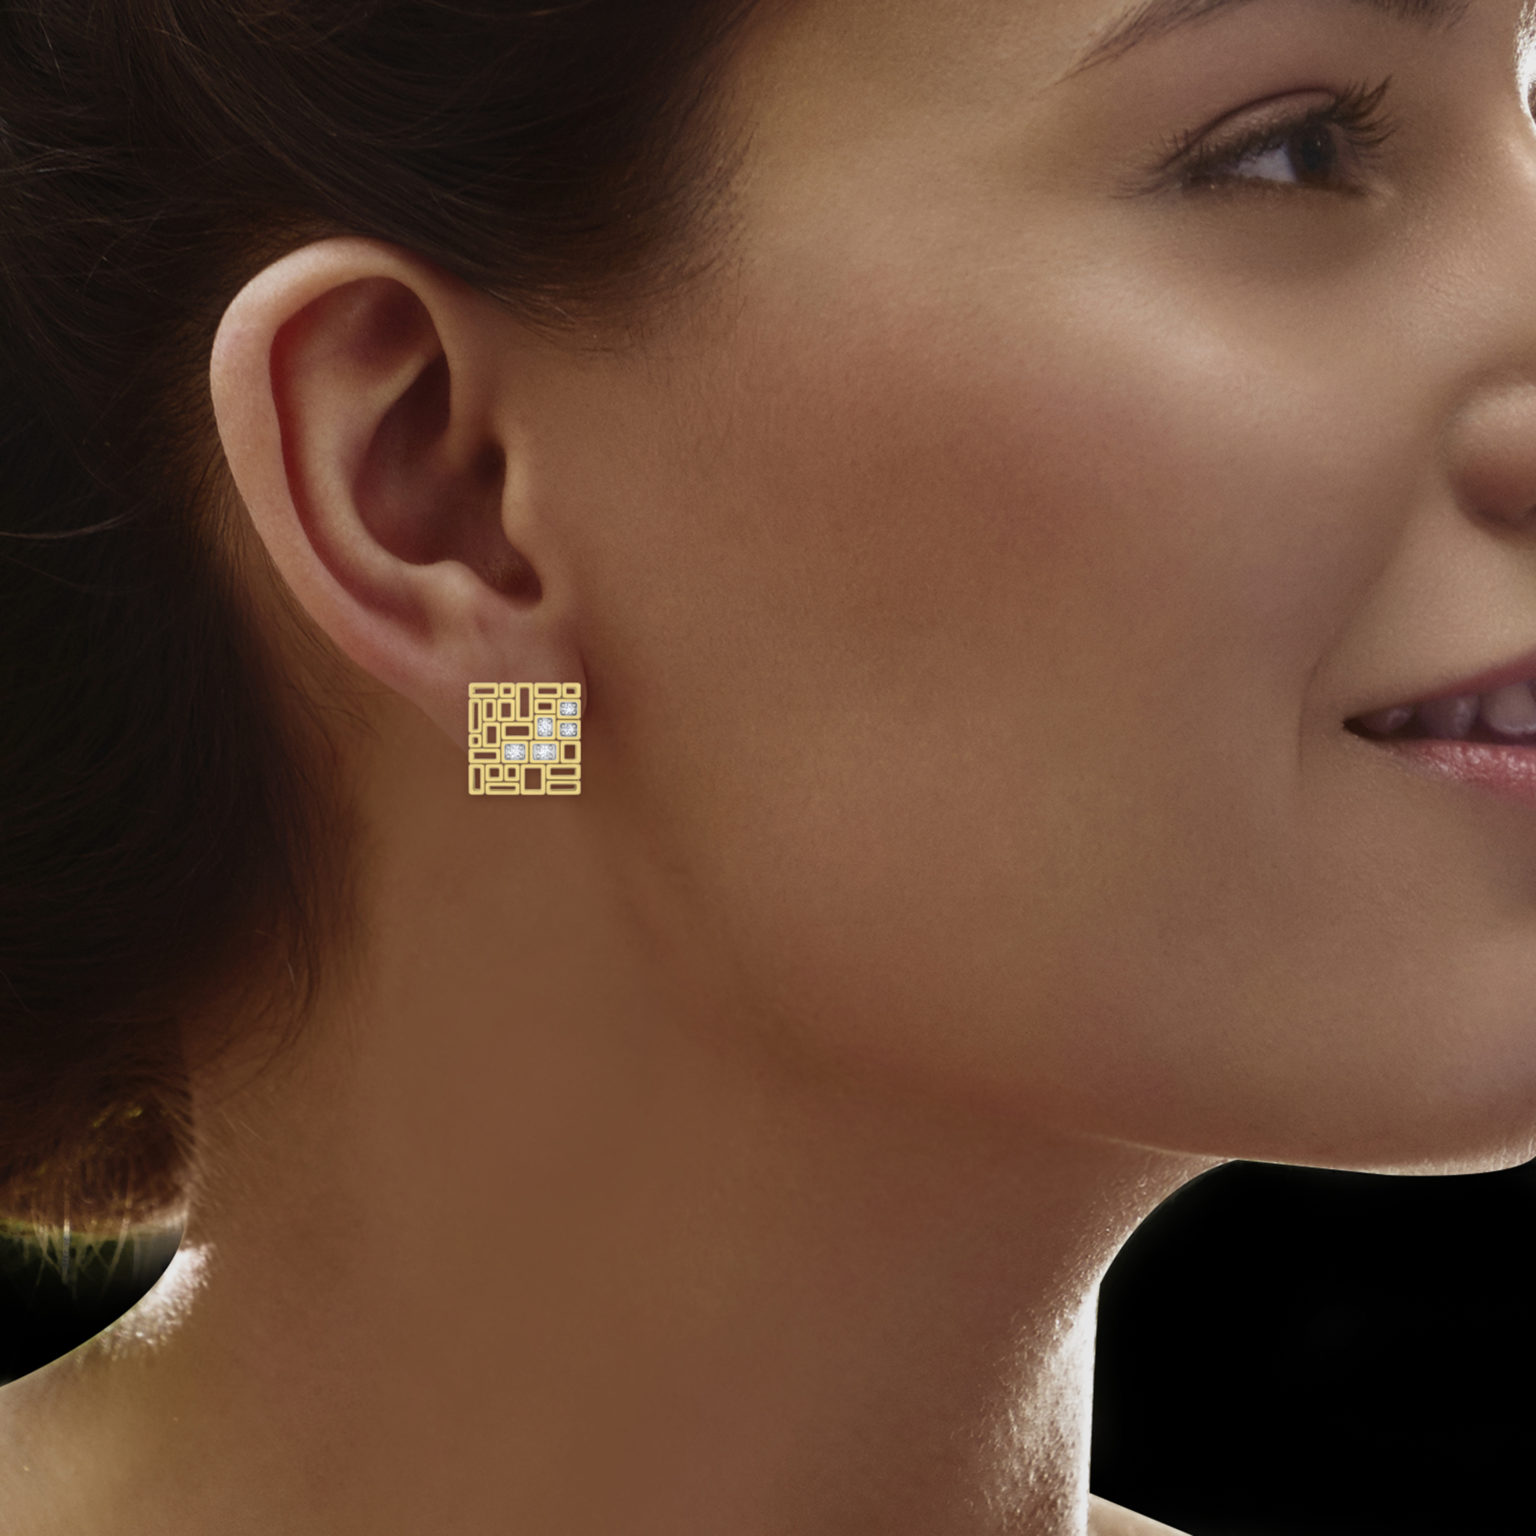 Blocky Earring Collection – 18 KT – RMDG ADER – 538